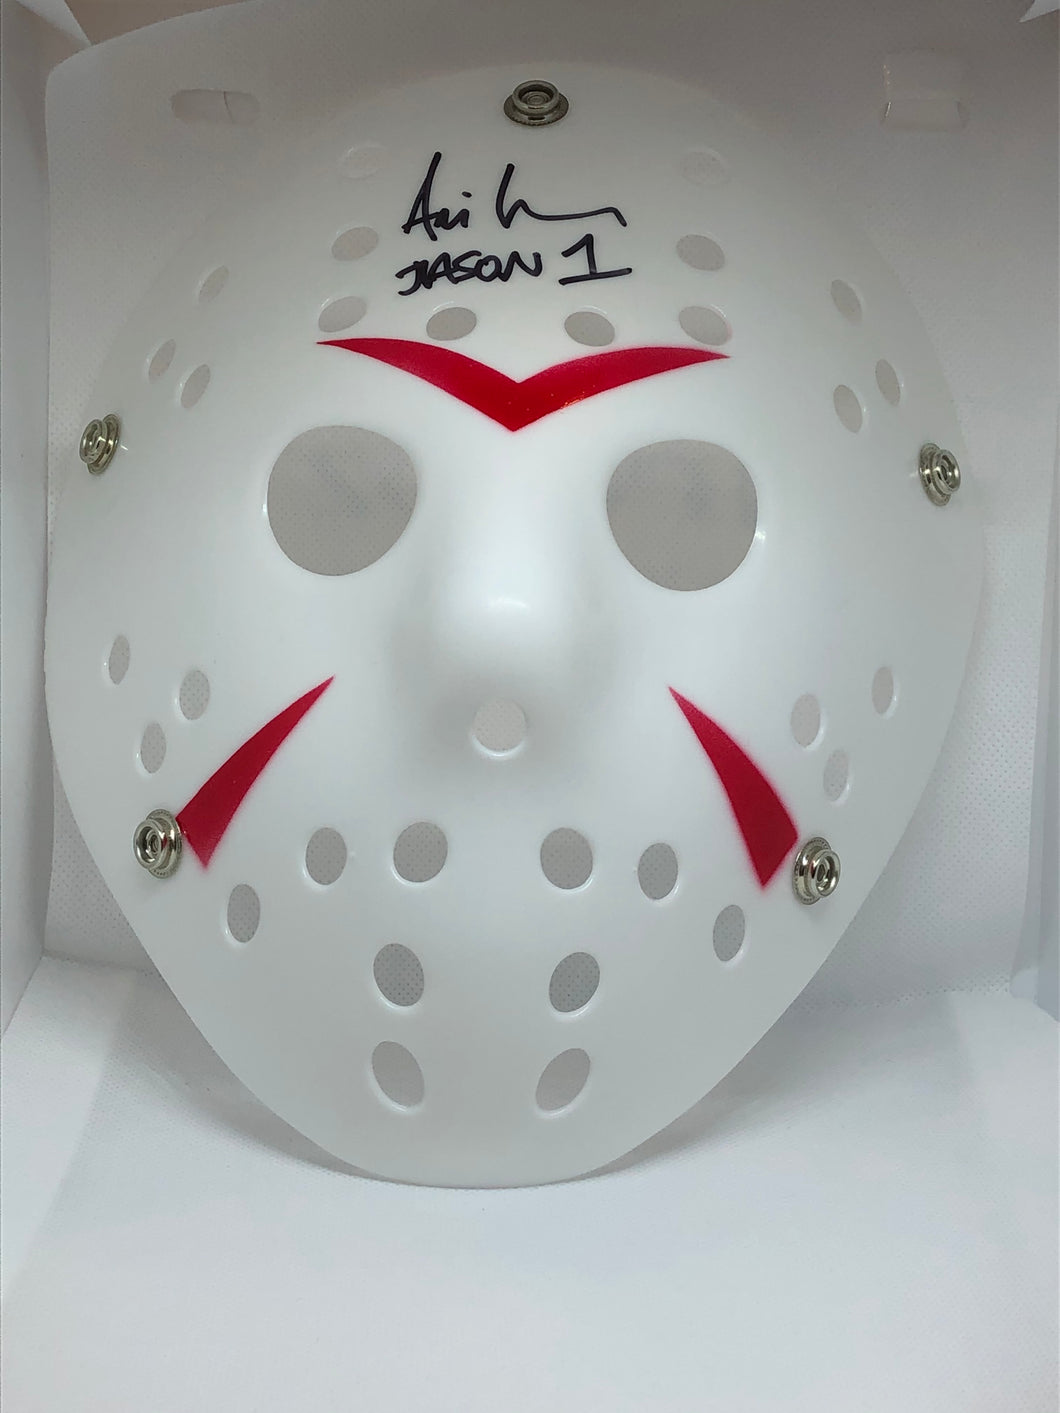 Jason Voorhees White Mask (without elastic band) from Friday the 13th  signed by Ari Lehman who played Jason (1) in the first Friday the 13th movie.